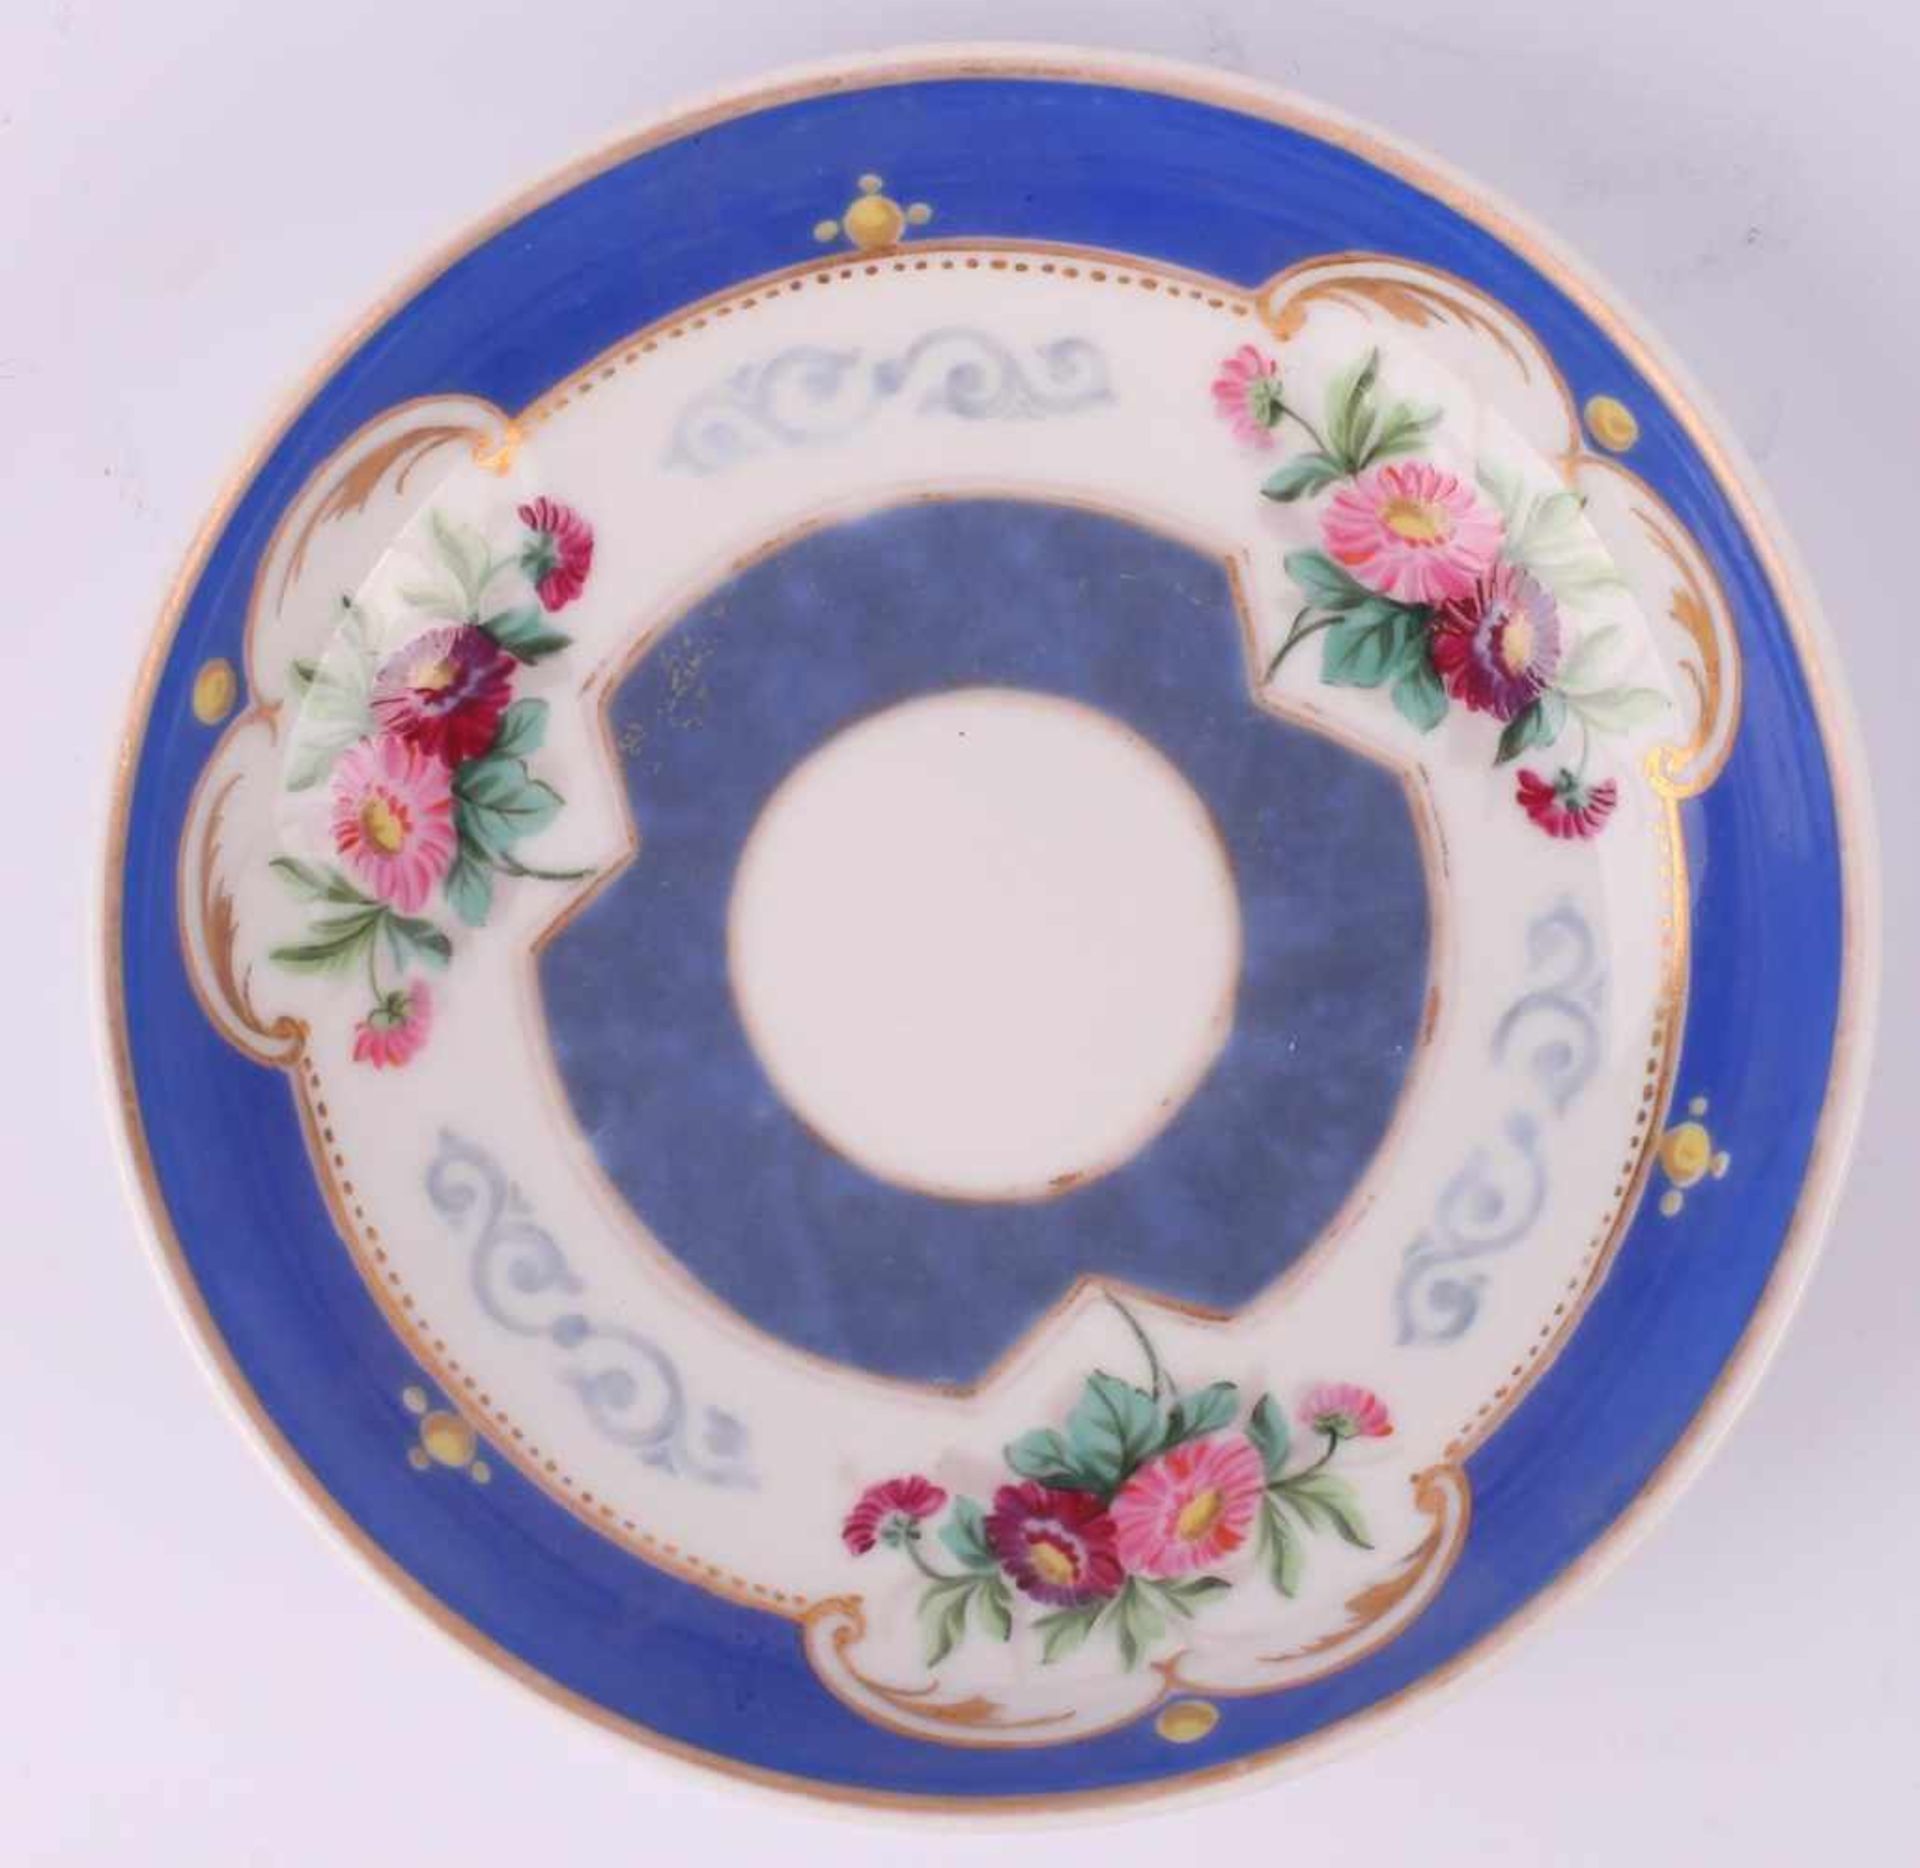 Tea cup and saucer set with floral painting. Russia. 1890s. Porcelain, painting, gilding. Cup: 5x8 - Image 5 of 13